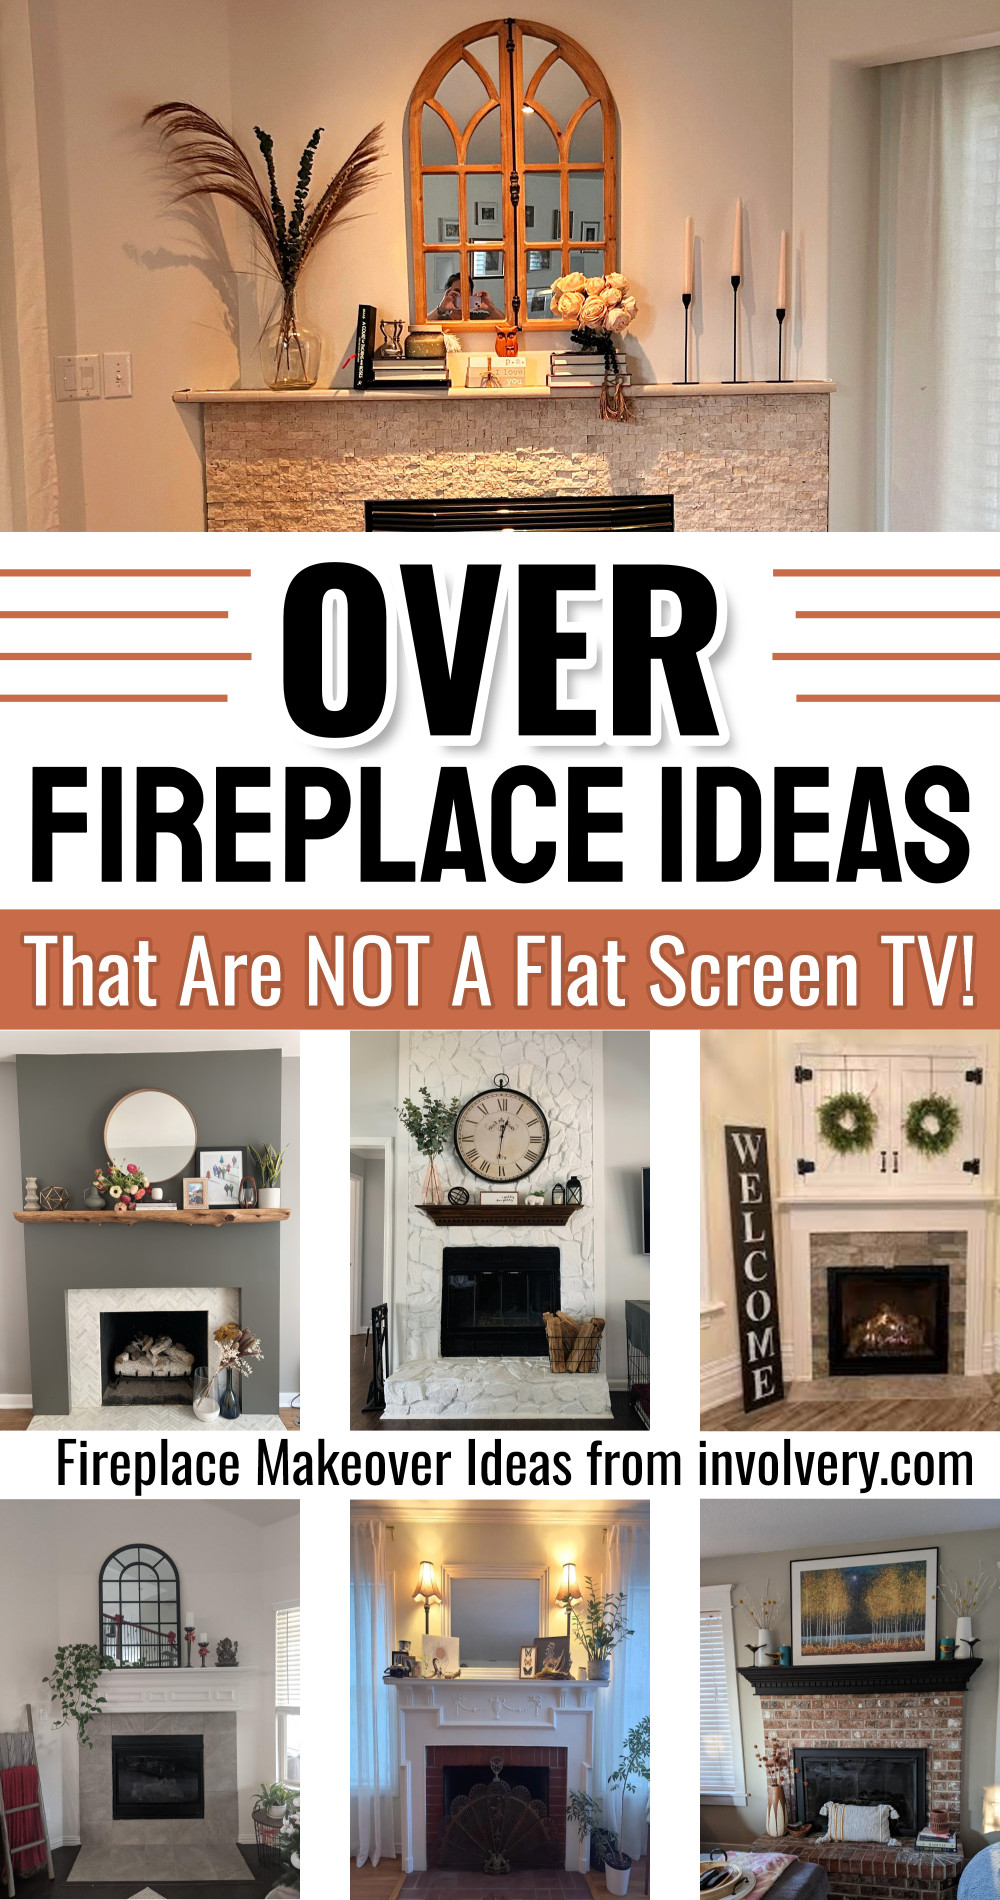 Over Fireplace Ideas That Are NOT A TV